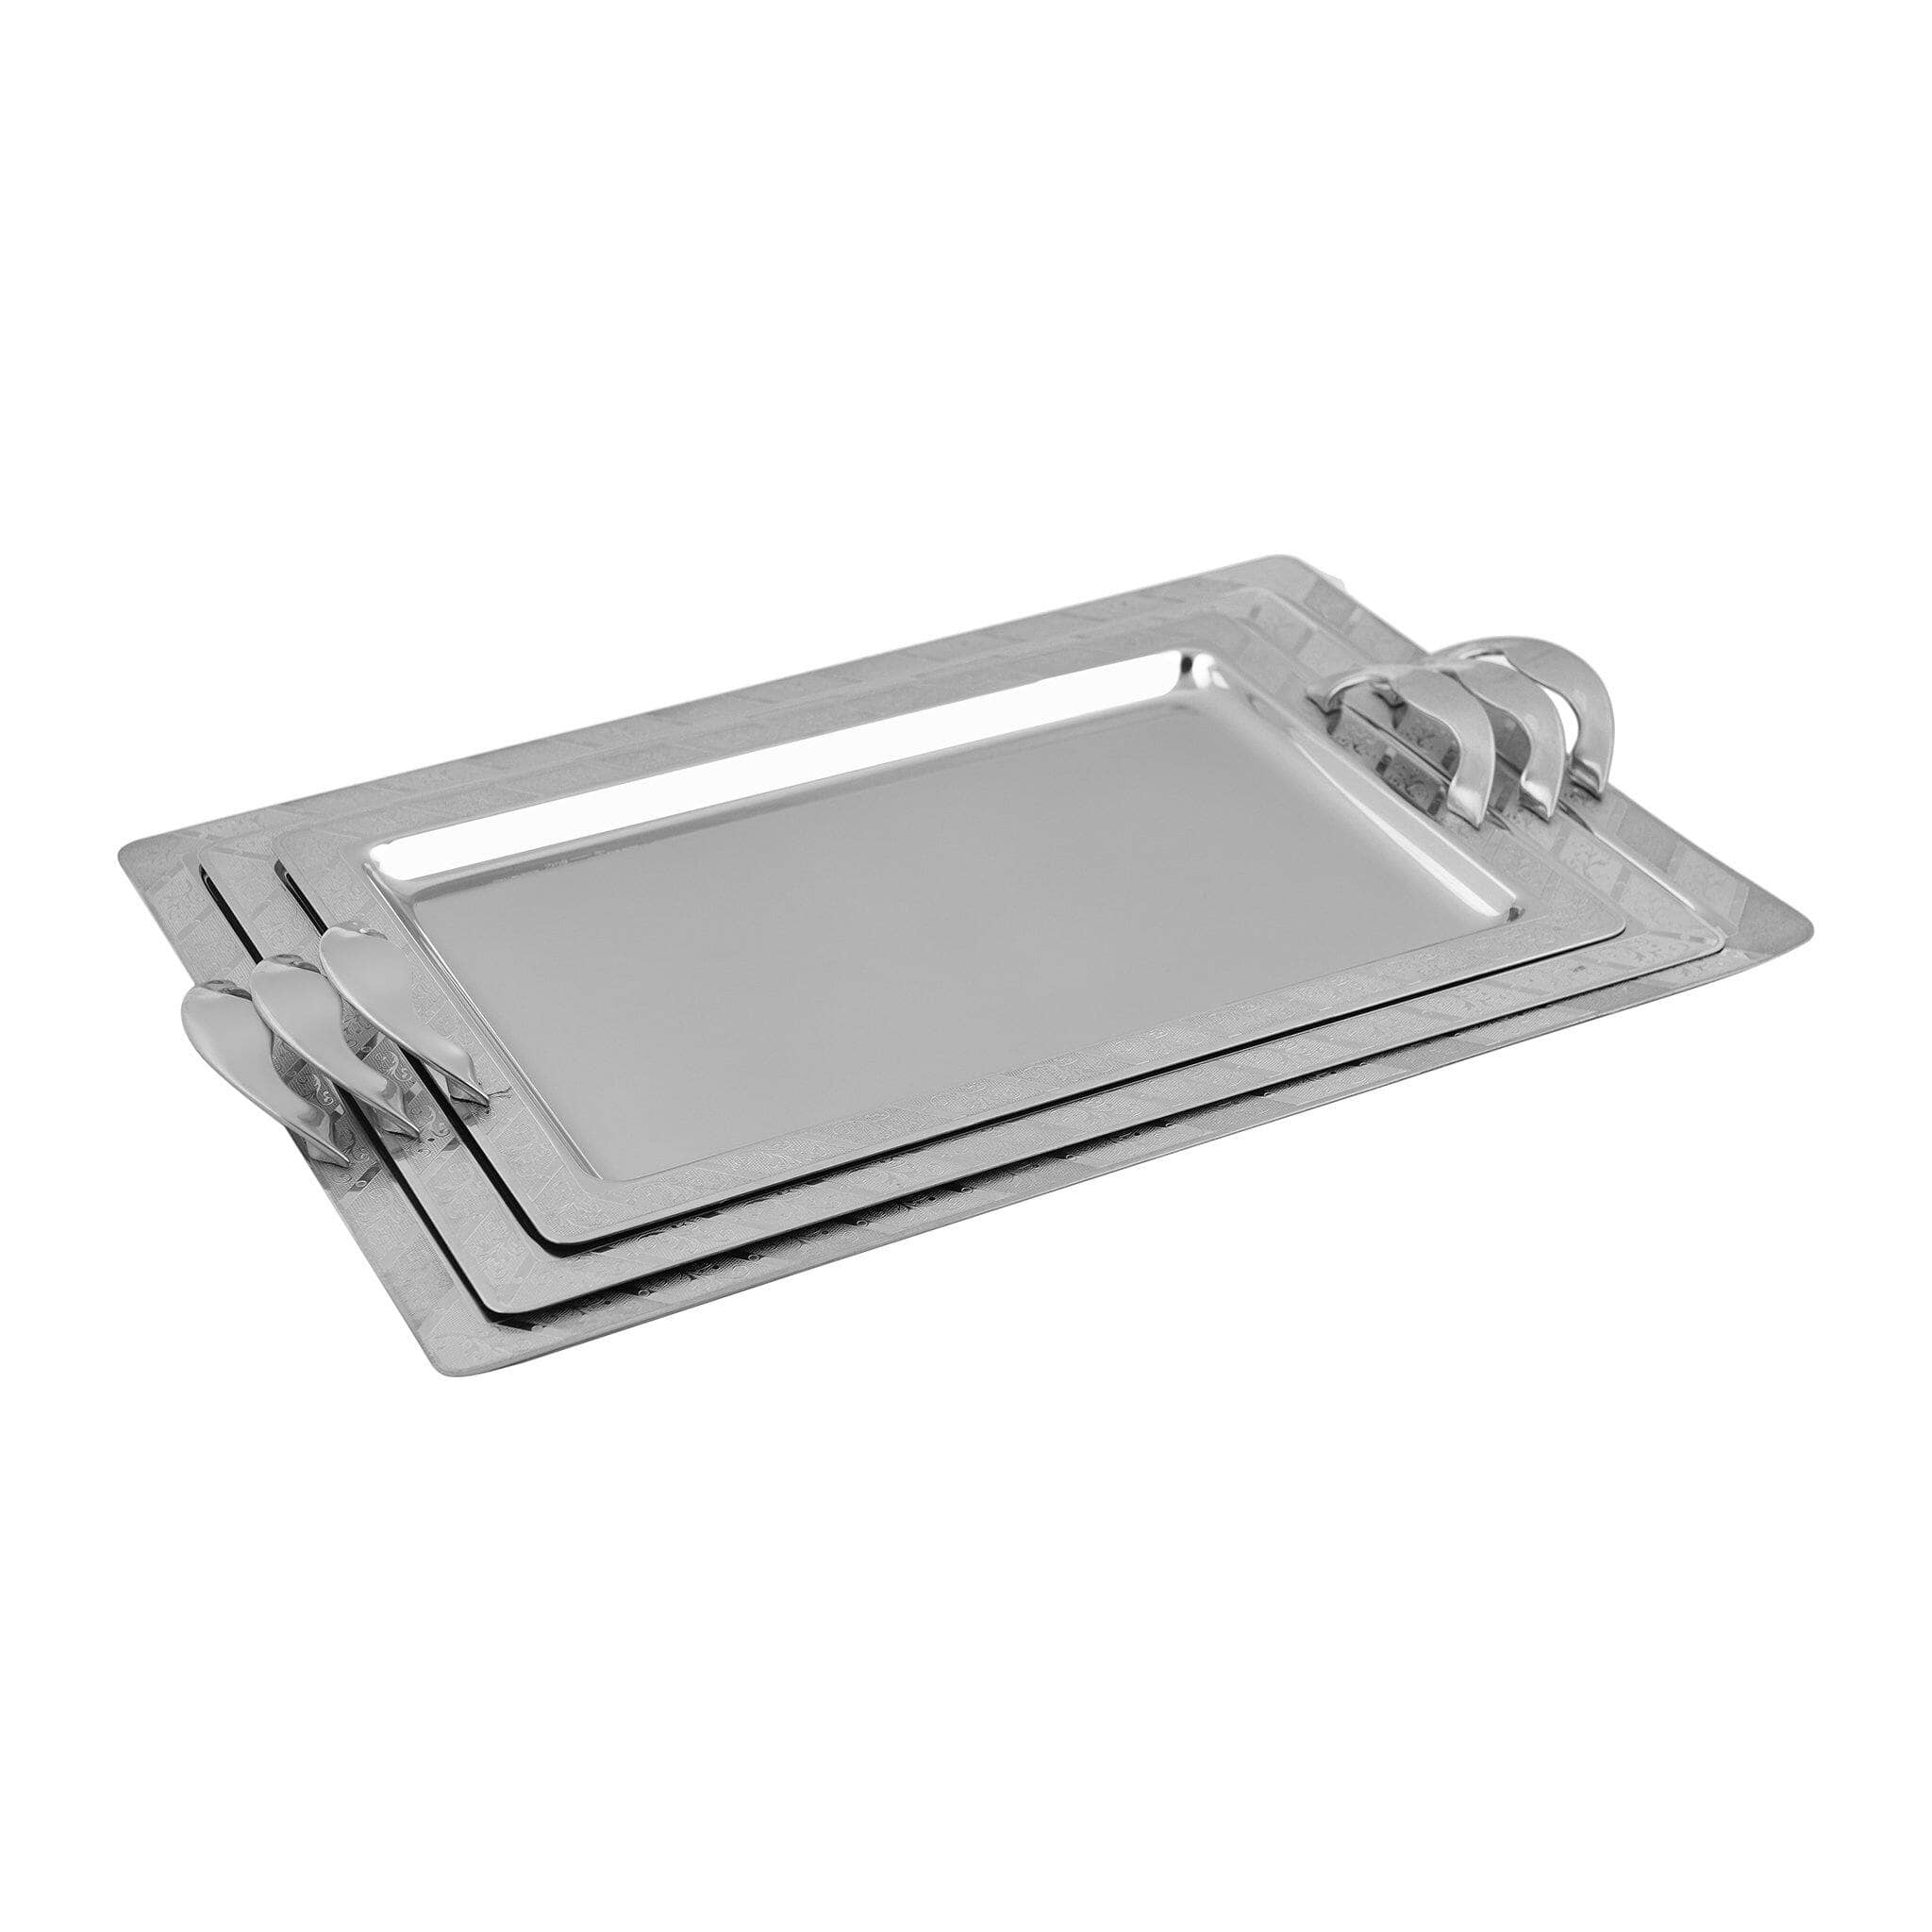 Elegant Gioiel - Rectangular Tray Set with Handles 3 Pieces - Stainless Steel 18/10 - 75000232